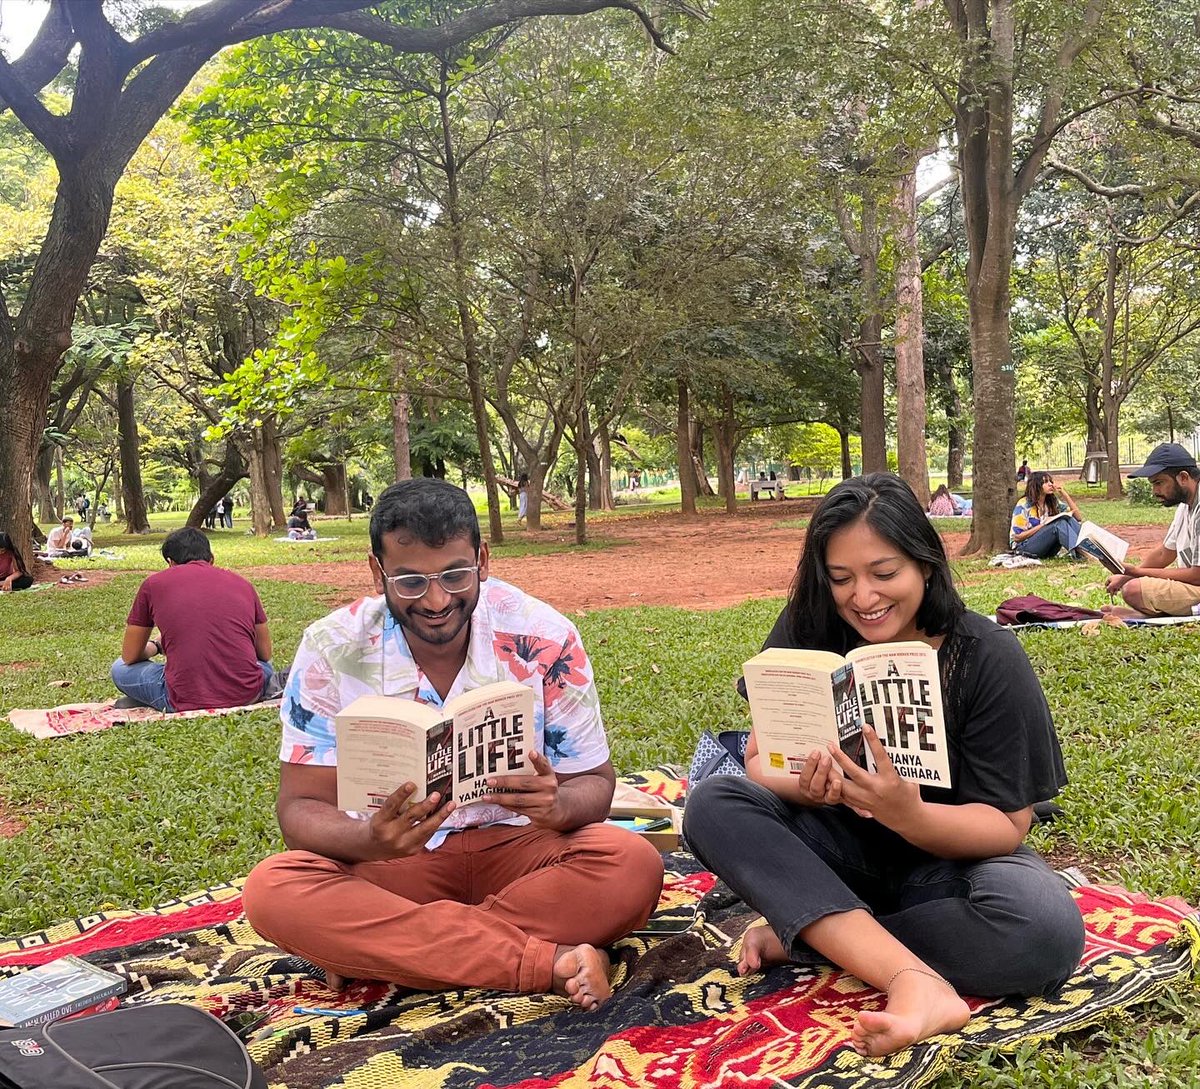 The 38th edition of CubbonReads unfolded beneath a beautiful pastel sky. Colourful flowers blanketed us and made the park feel magical and lovely.🌸🌼 Amidst this tranquility, stray dogs found comfort on our mats and curled up beside us for their naps. ☀️